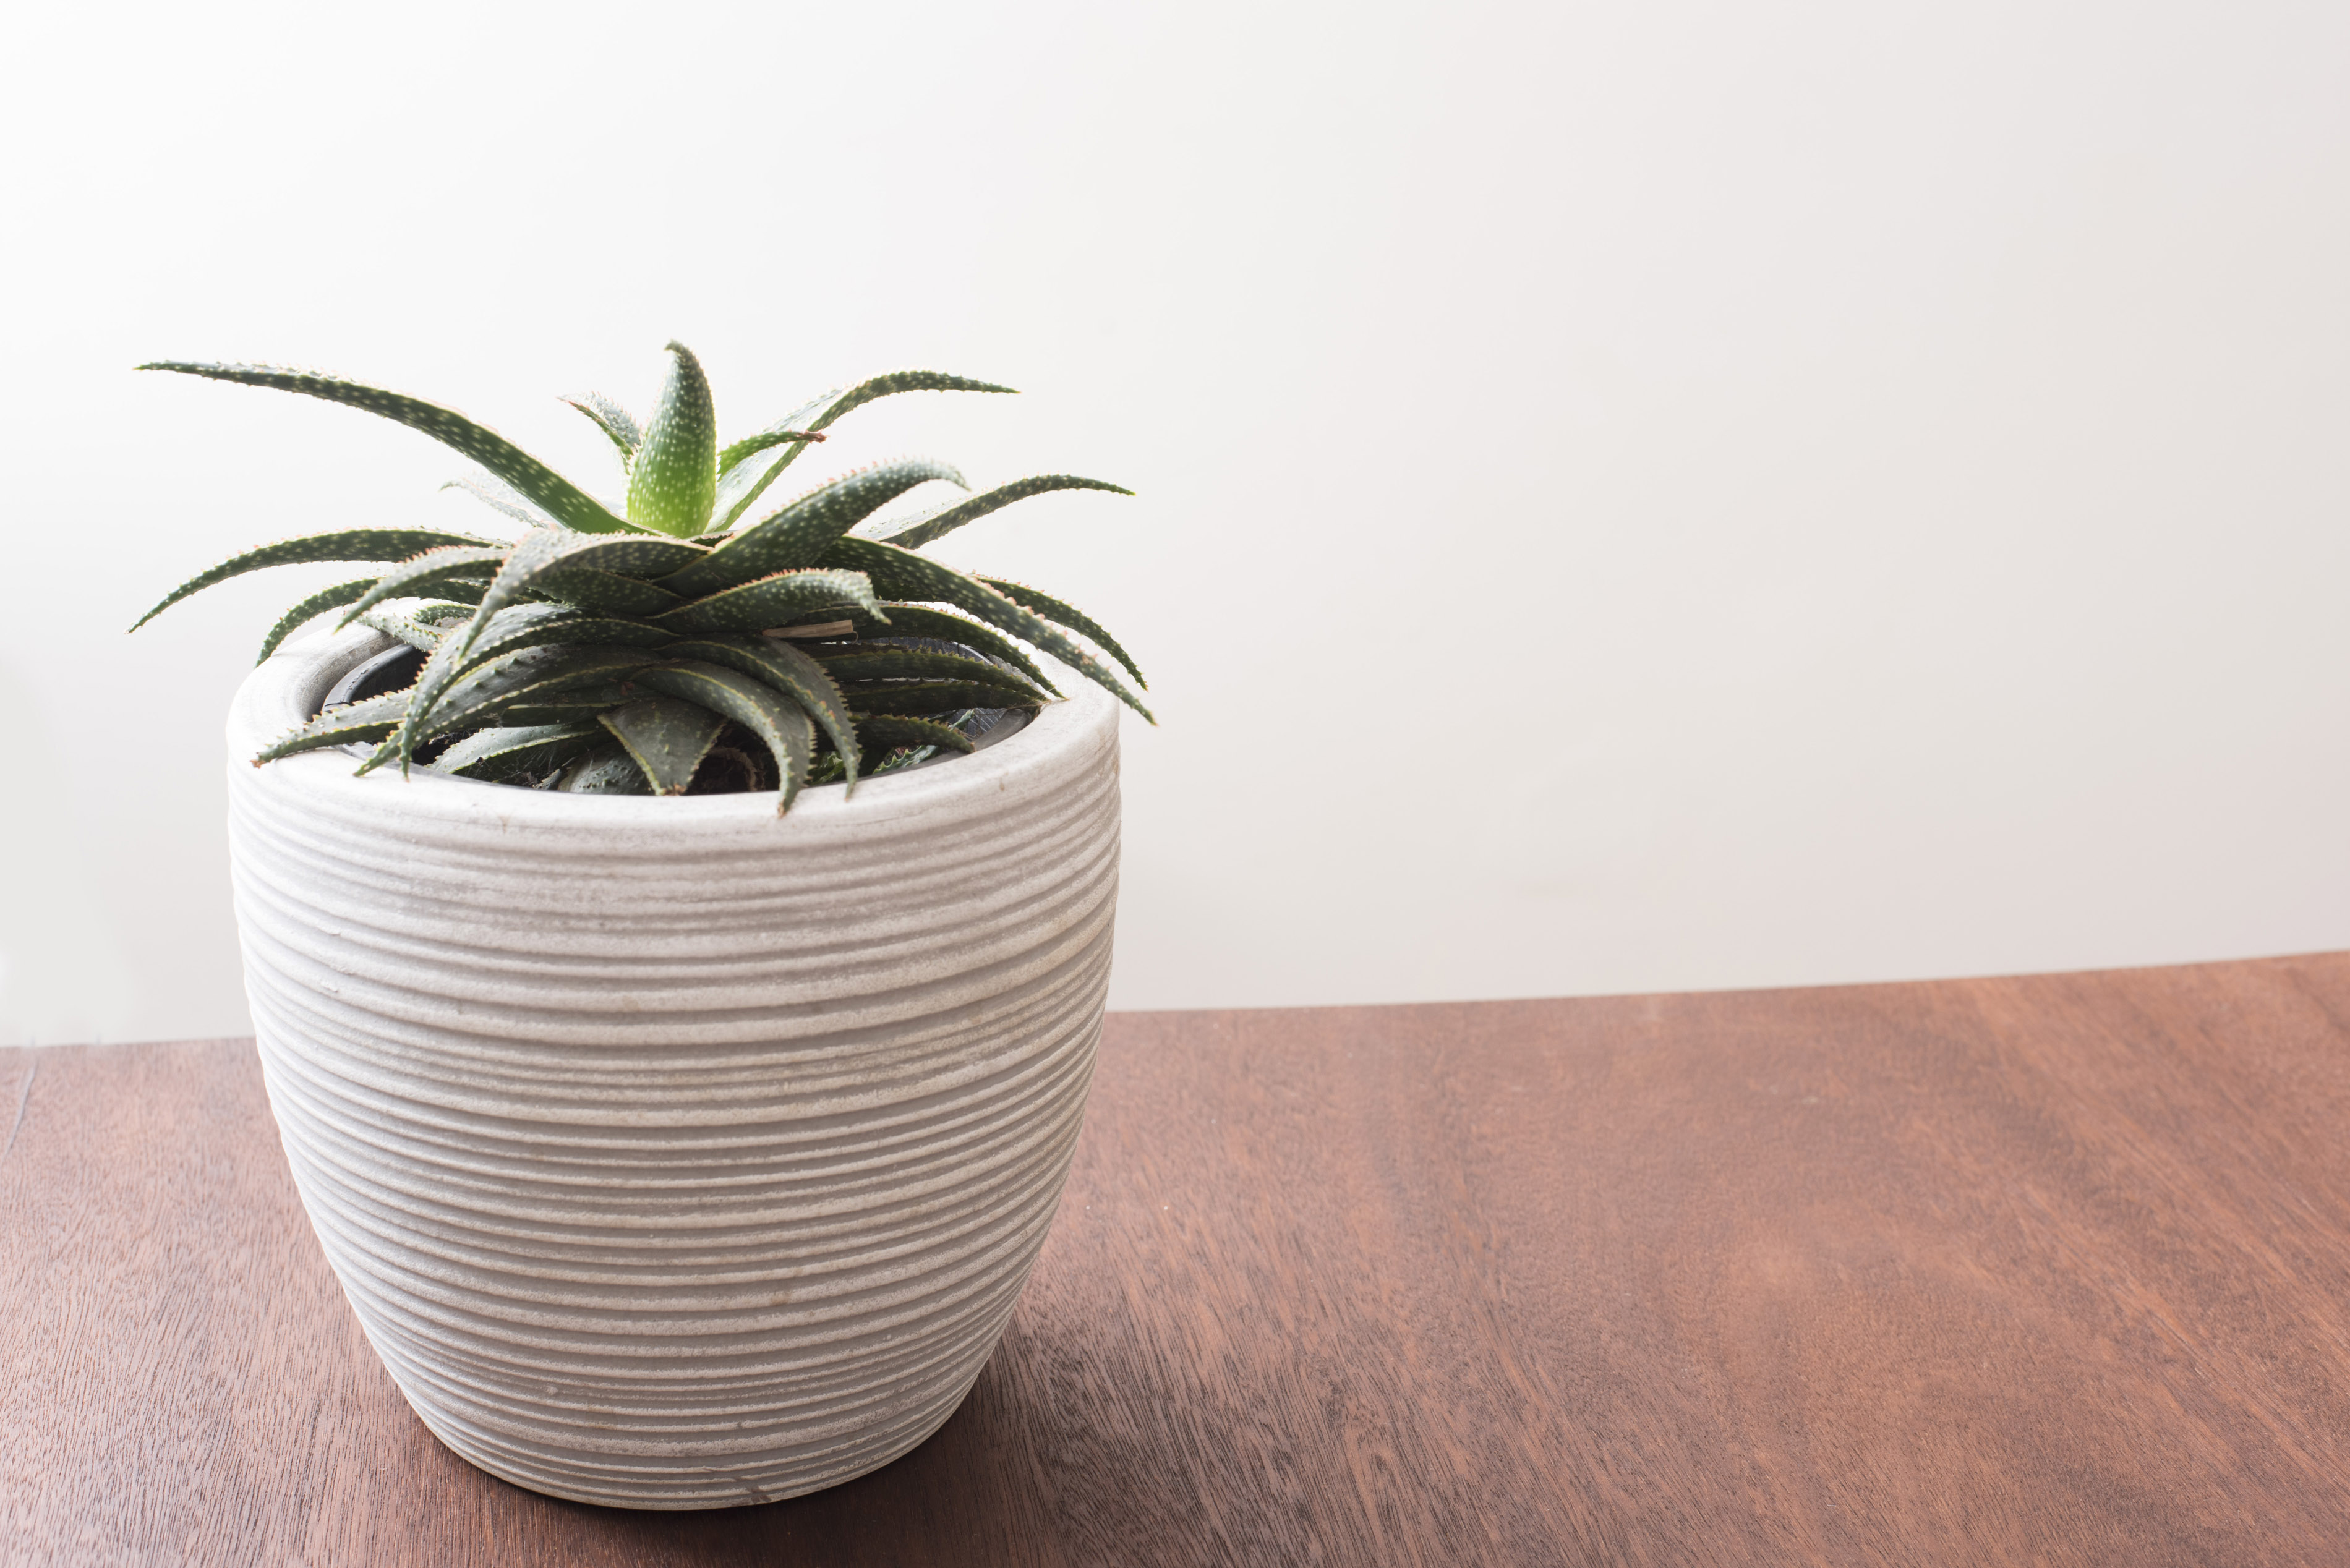 Free Stock Photo 17389 Aloe plant growing in a decorative white pot ...